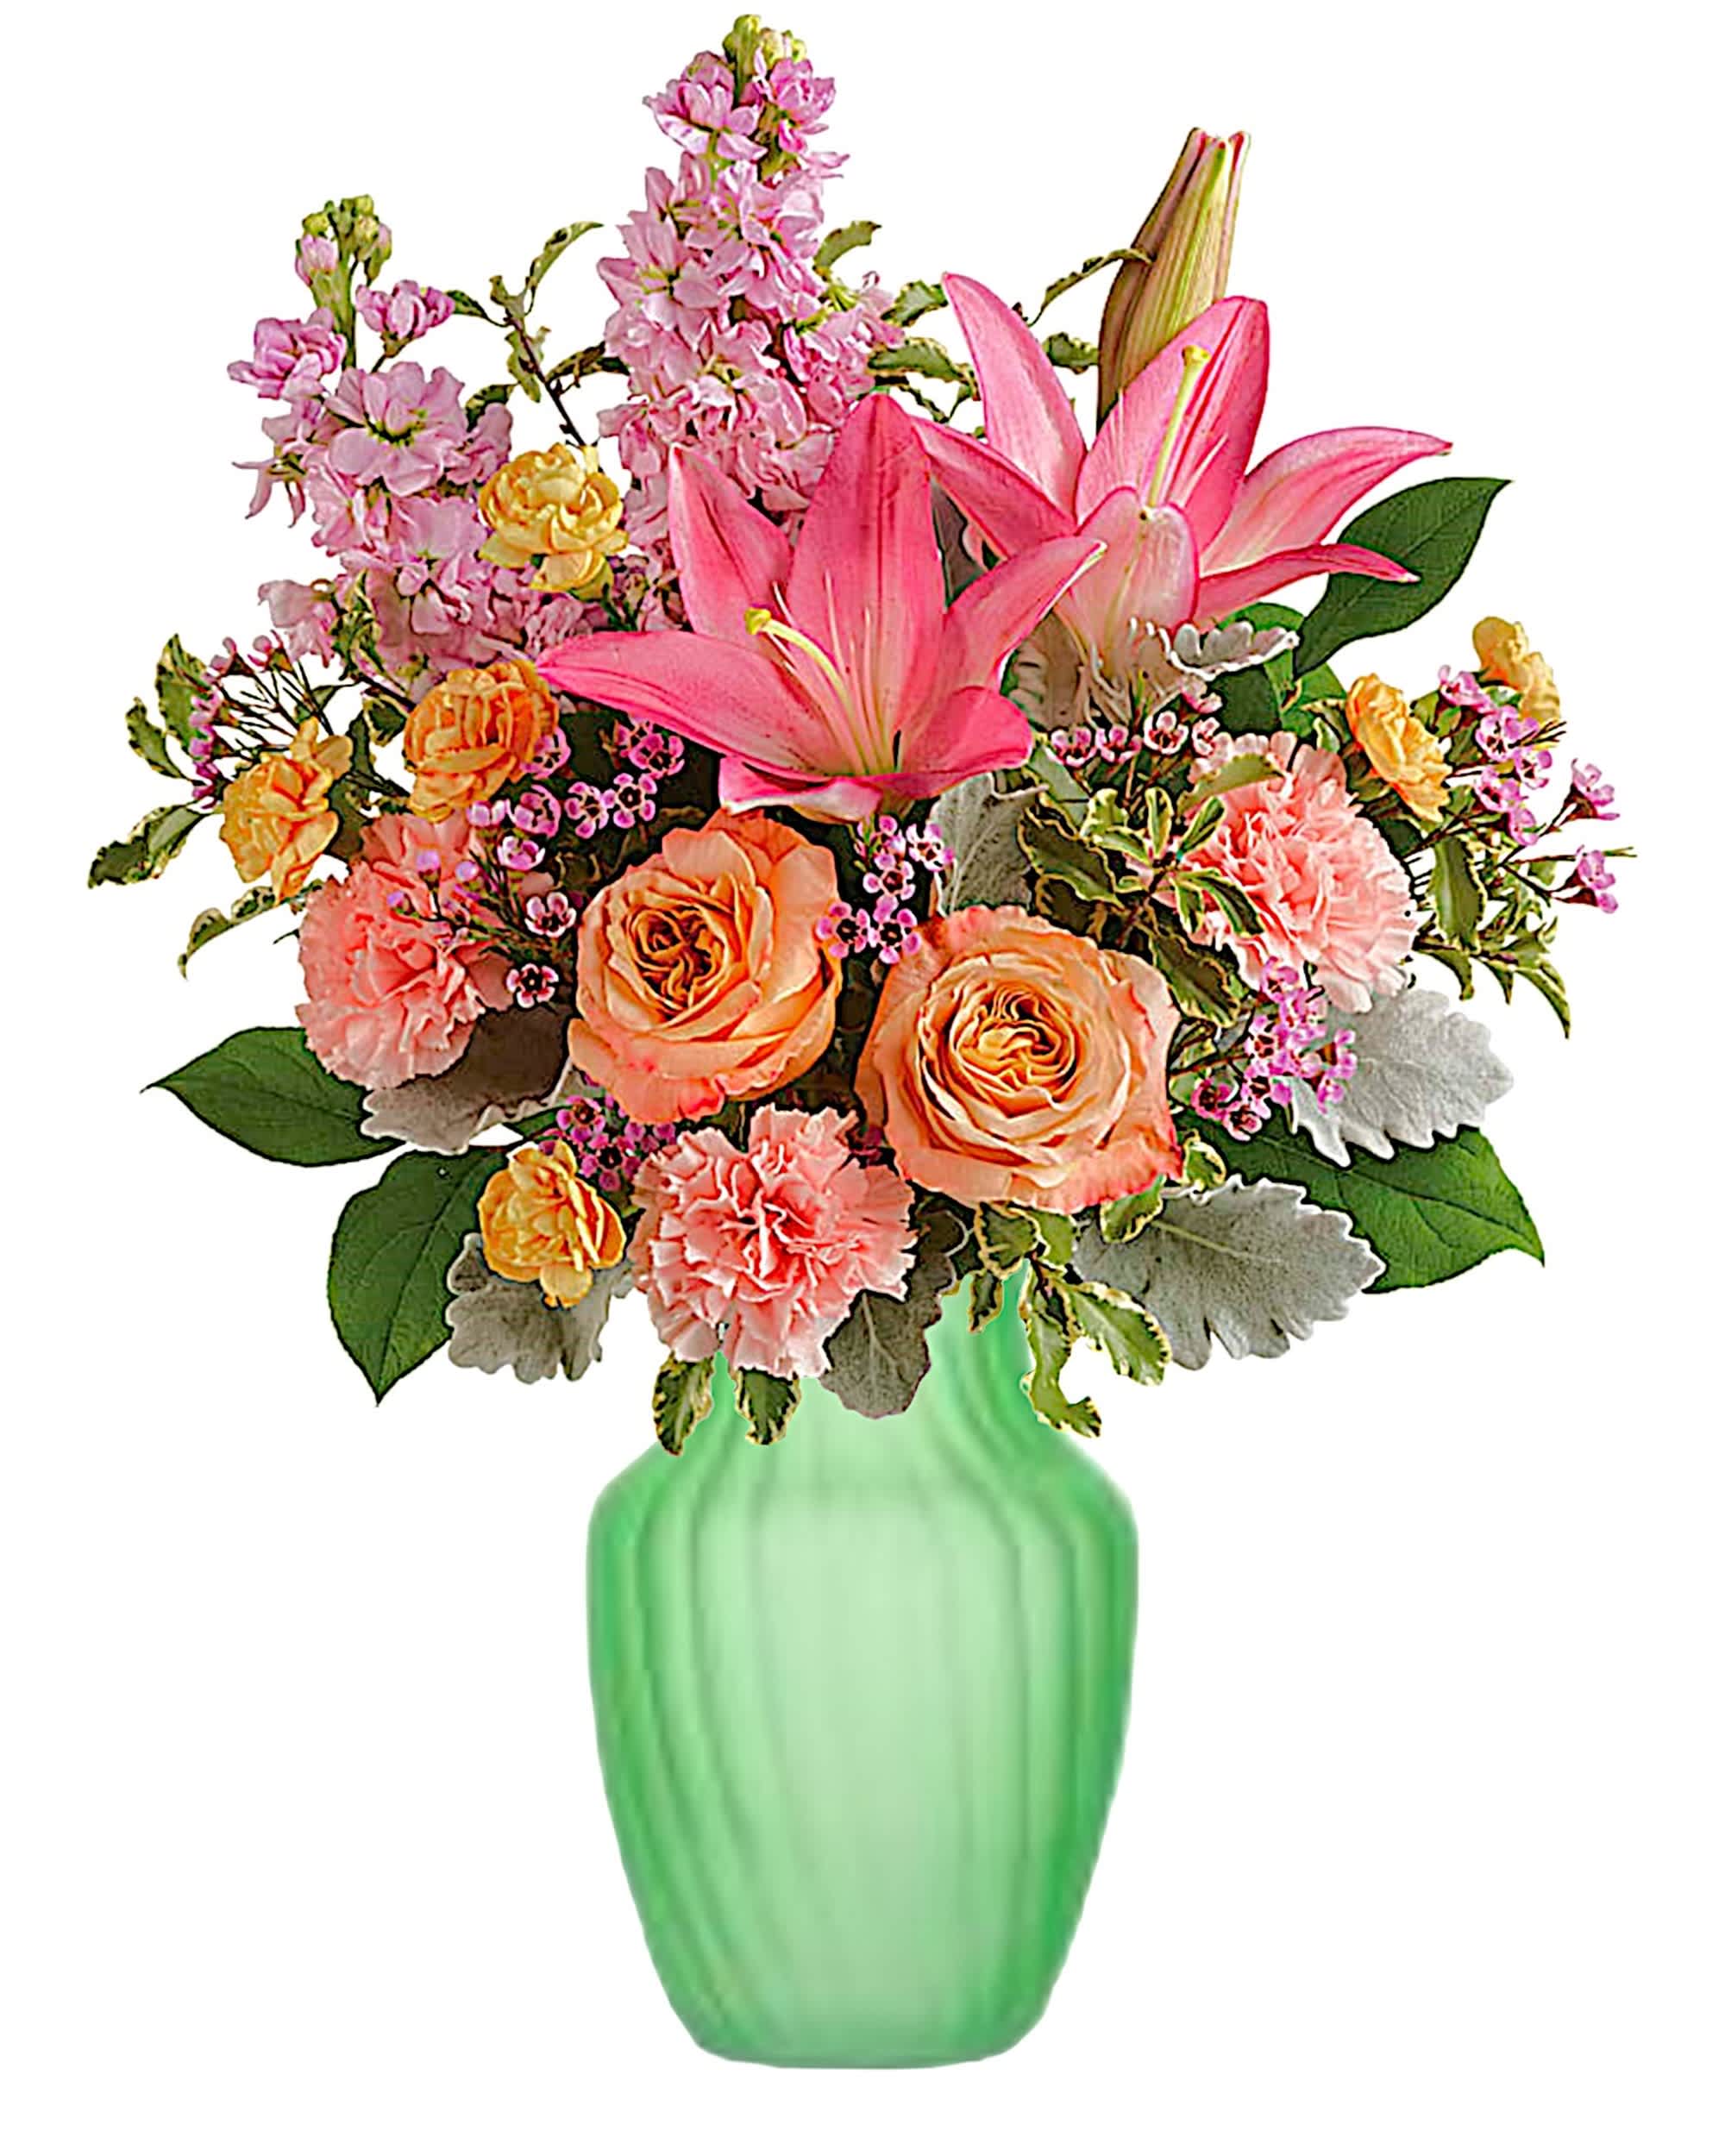 Pretty and Posh - Brighten any day with blushing blooms, cheerfully presented in a glass vase they'll enjoy for years to come!  DETAILS Peach roses, pink Asiatic lilies, pink carnations, peach miniature carnations, pink stock, pink waxflower are accented with dusty miller, pitta Negra, and salal leaf.  Item # NFMD-01-1  FLORIST-TO-DOOR  Orientation: All-Around  BLOOM DETAILS Roses Asiatic Lilies Carnations Mini-Carnations Stock Waxflower Filler Greenery  The Standard Arrangement is approximately 19 1/2&quot; H x 14 1/2&quot; W. The Deluxe Arrangement is approximately 19 1/2&quot; H x 14 1/2&quot; W. The Premium Arrangement is approximately 20&quot; H x 15&quot; W.  Designed by our award-winning florist designers.  HOW TO CARE FOR YOUR FLOWERS 1. Keep in a location without direct sunlight and away from extreme heat or cold. 2. Replace the water regularly, and mix in the flower food packet provided 3. Trim the stems every other day 4. As flowers/foliage wilt, remove &amp; discard  Please Note: The arrangement pictured reflects an original design for this product. While we always do our best to follow the original flower recipe, the exact flower or container is sometimes unavailable. We may replace items of equal or greater value to deliver the freshest flowers possible while keeping the style &amp; color palette. We assure you that we will create a beautiful, fresh flower arrangement with only the best quality flowers to keep you as a loyal customer.  How to place an order? We have several options. 1. You can place an order directly on this secure website. 2. You can call in your order by dialing: (323) 262 - 9238 3. You can visit our store (appointment recommended 323.262.9238)  NINFA'S FLOWERS 2405 WHITTIER BLVD. LOS ANGELES, CA. 90023  ATTENTION: *Please note that on busy holidays, Valentine's Day, and Mother's Day, we cannot verify if the recipient received the flowers until the following day because our drivers don't turn in their signature delivery tablets until the following day. You can verify delivery on the website after 10:00 pm or you can call 323.262.9238 the following day after 10:00 am. Thank you for your patience and understanding.